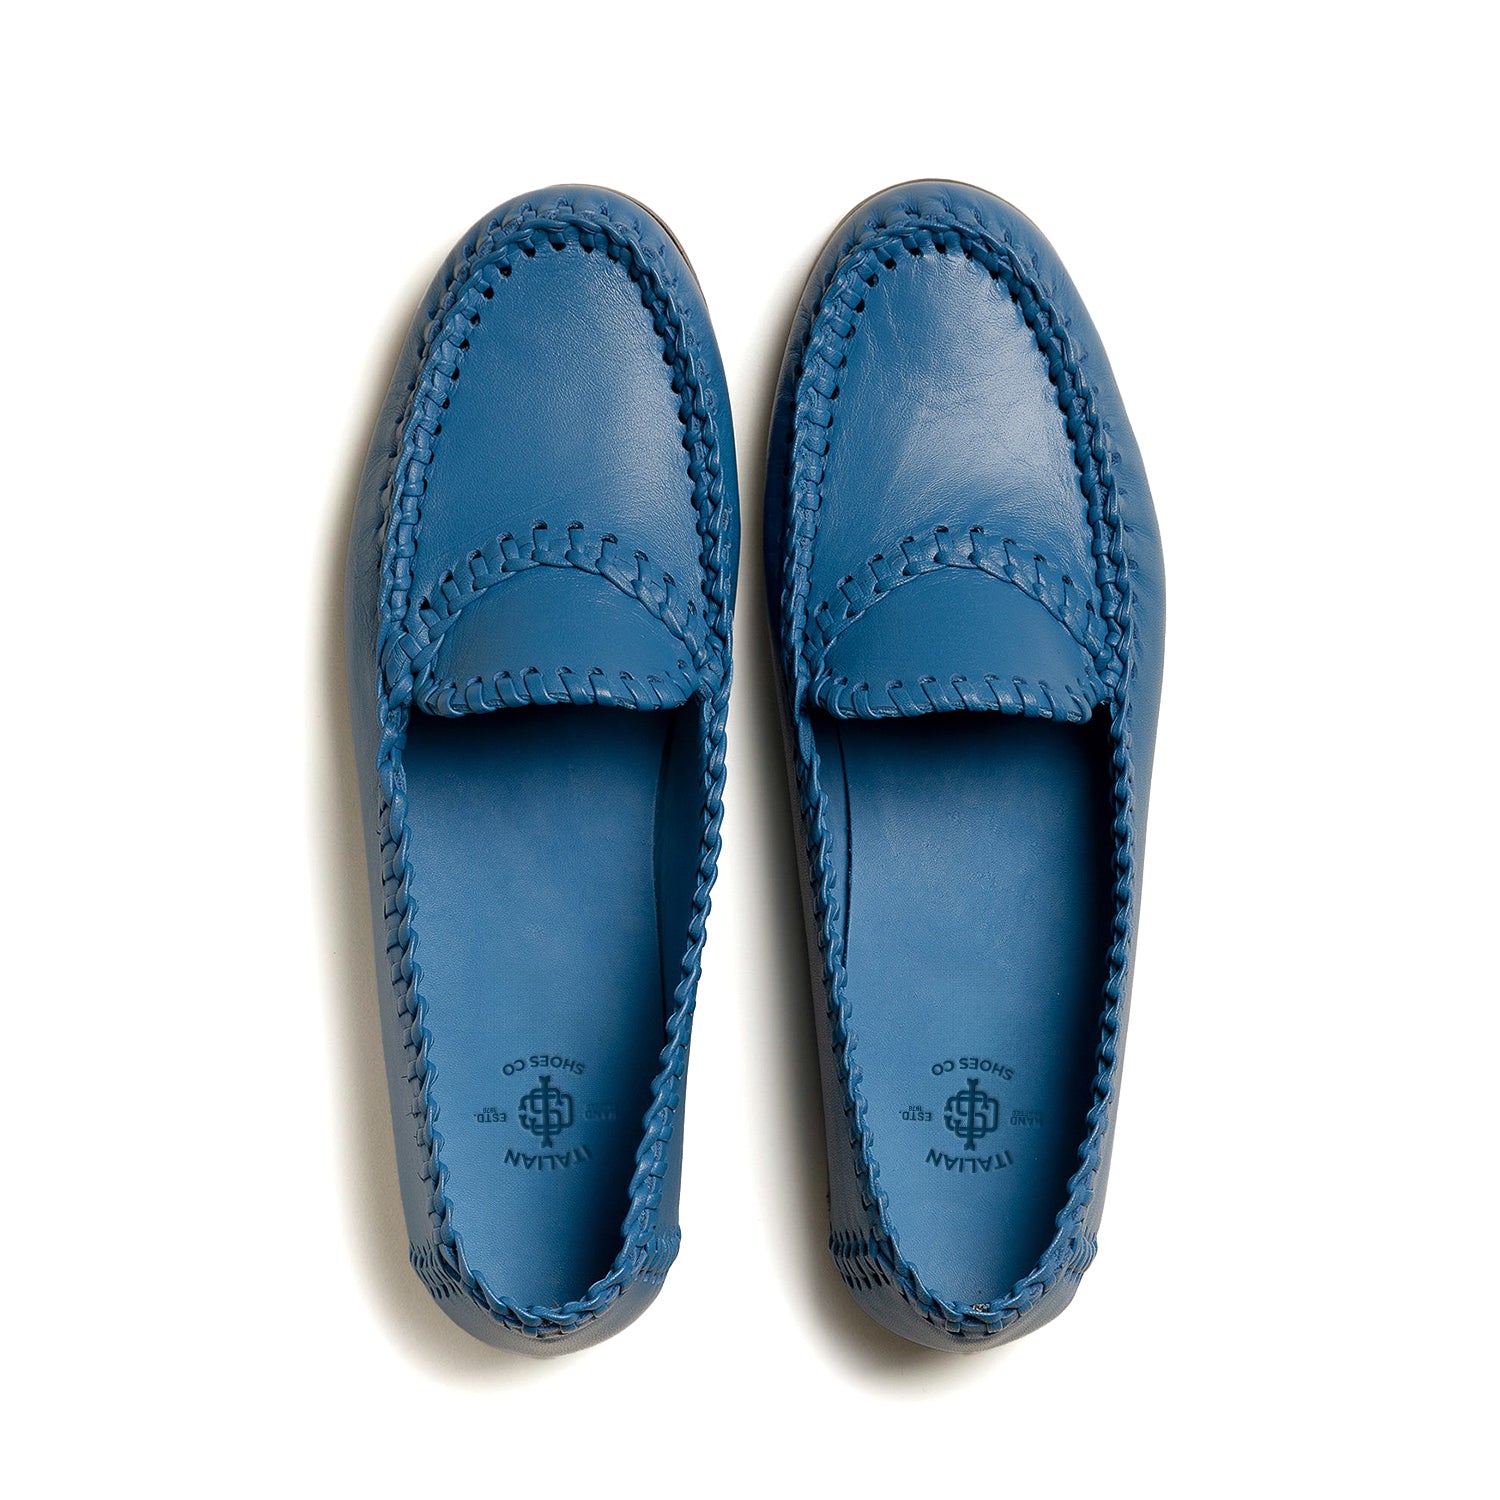 Men's Braided Seams Pull-on Loafer